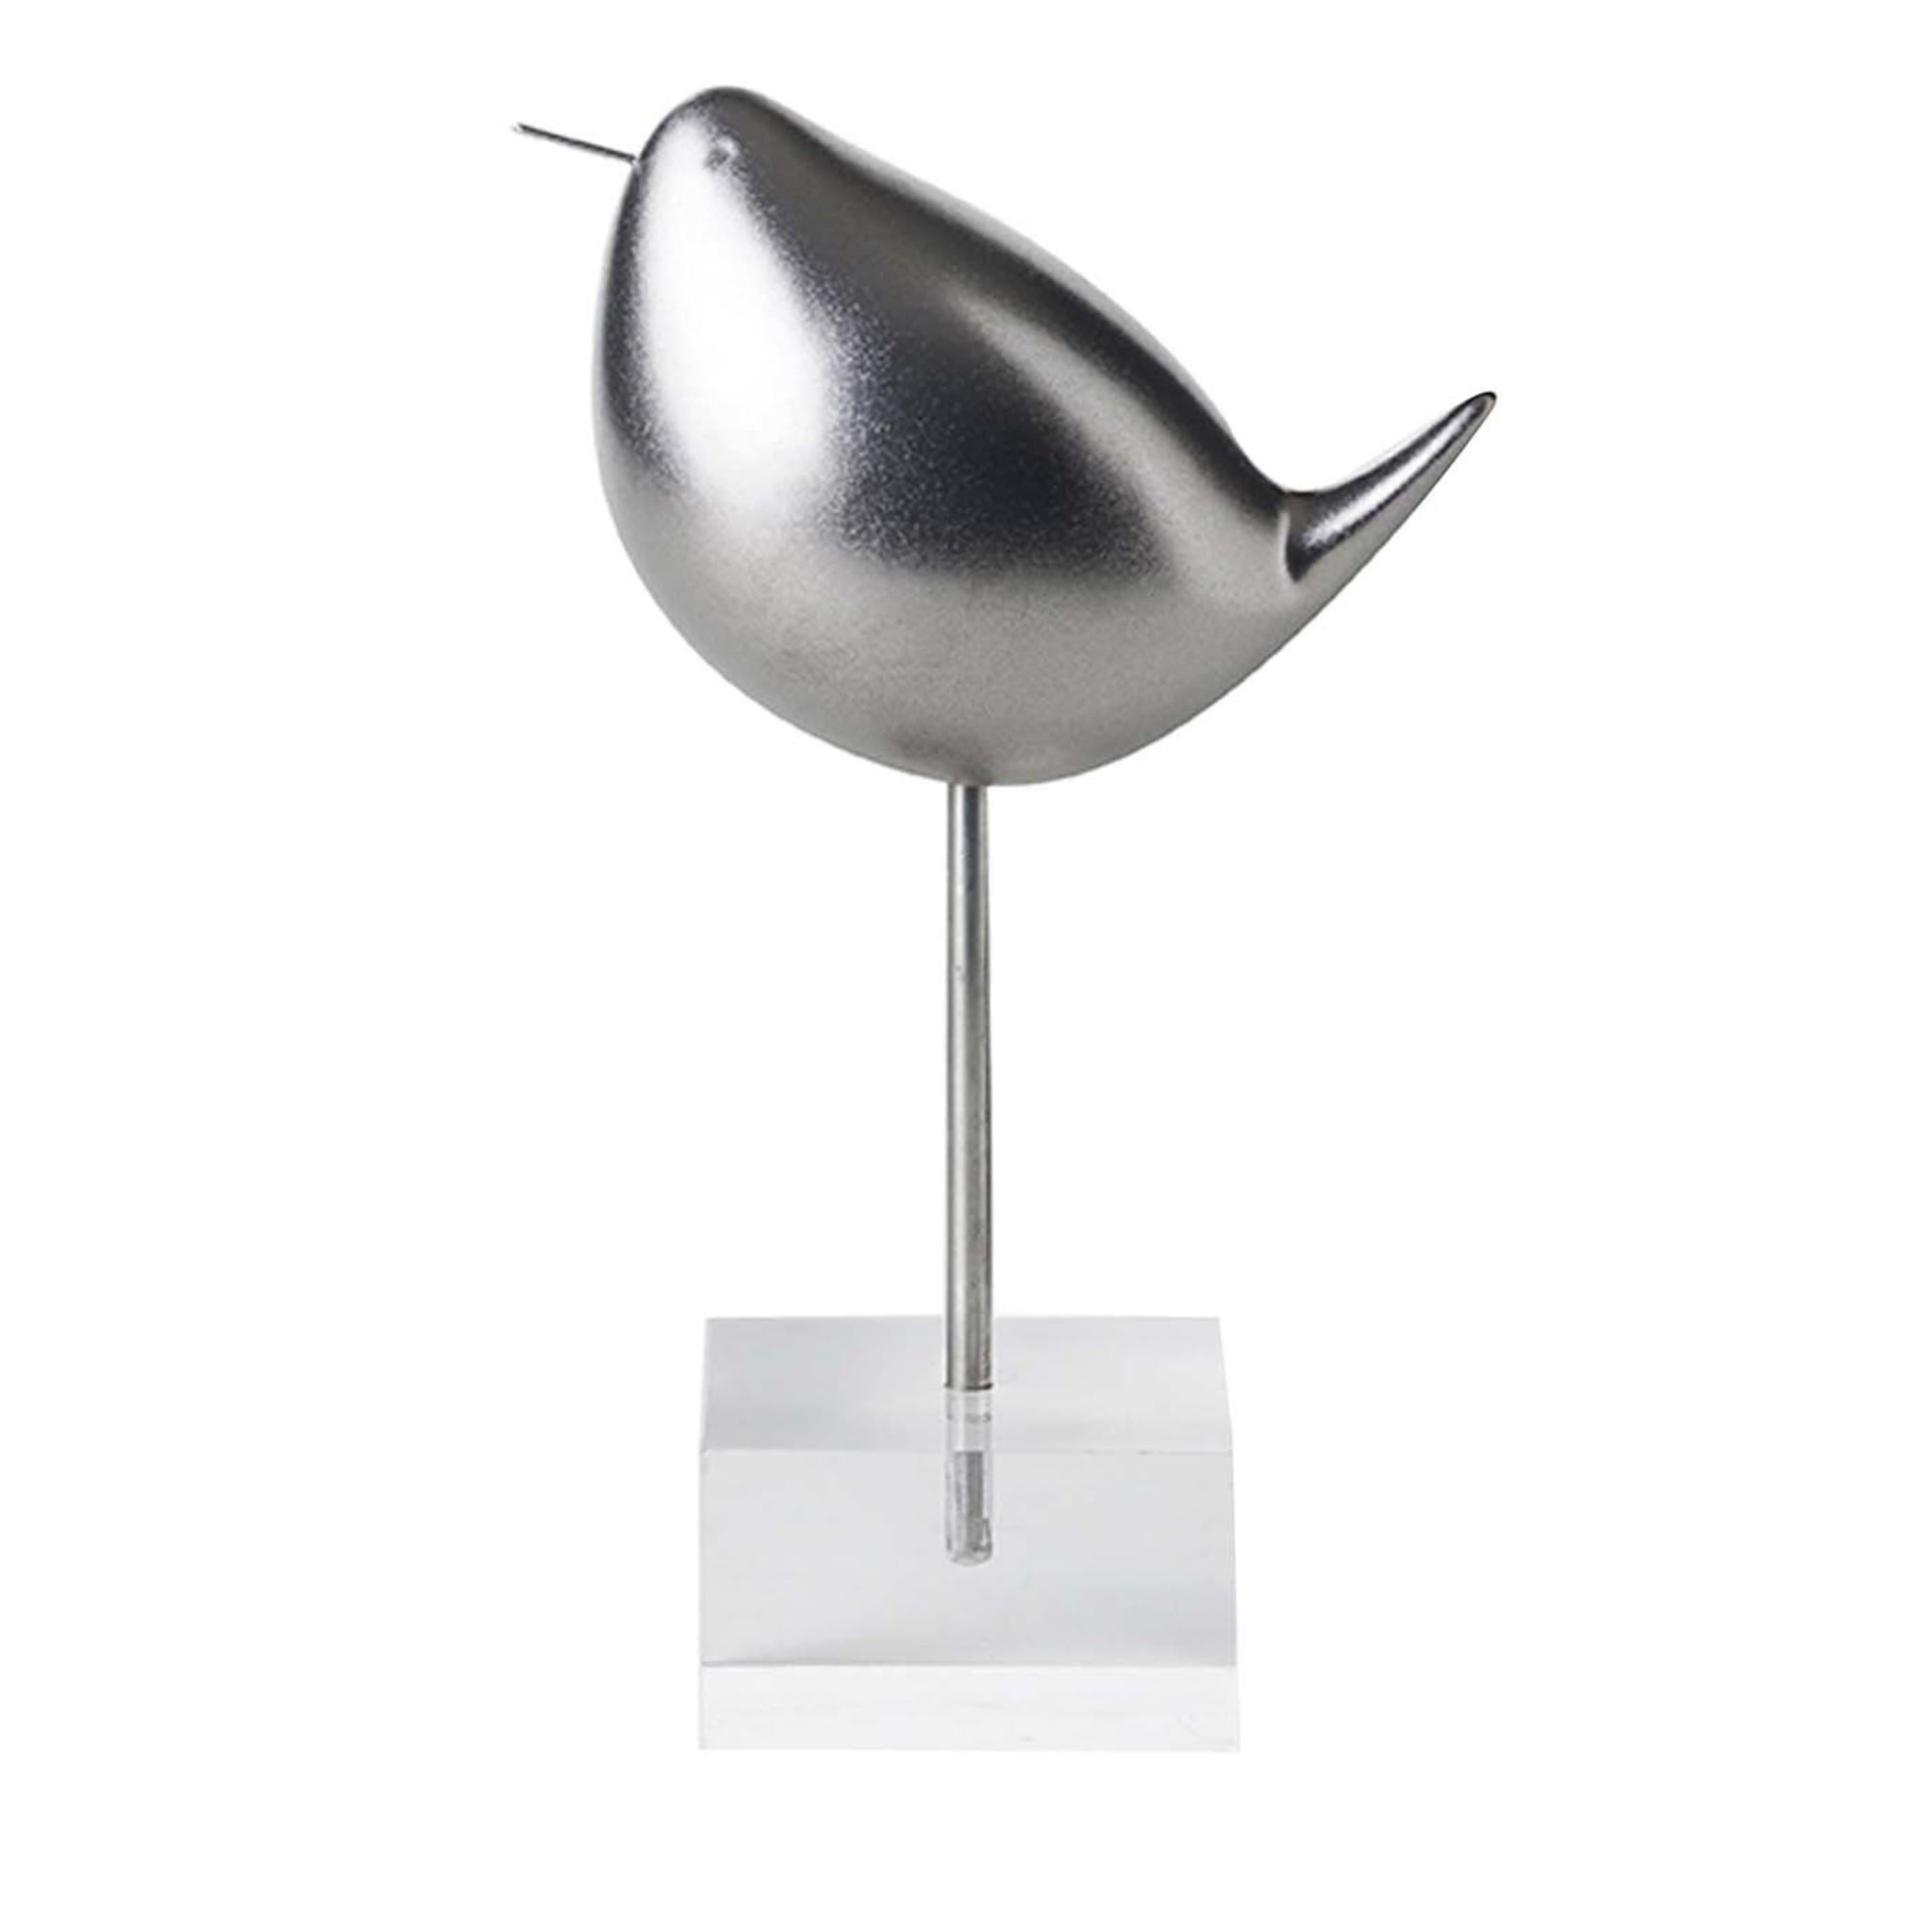 Silver Bird on a Stand by Aldo Londi #2 - Main view